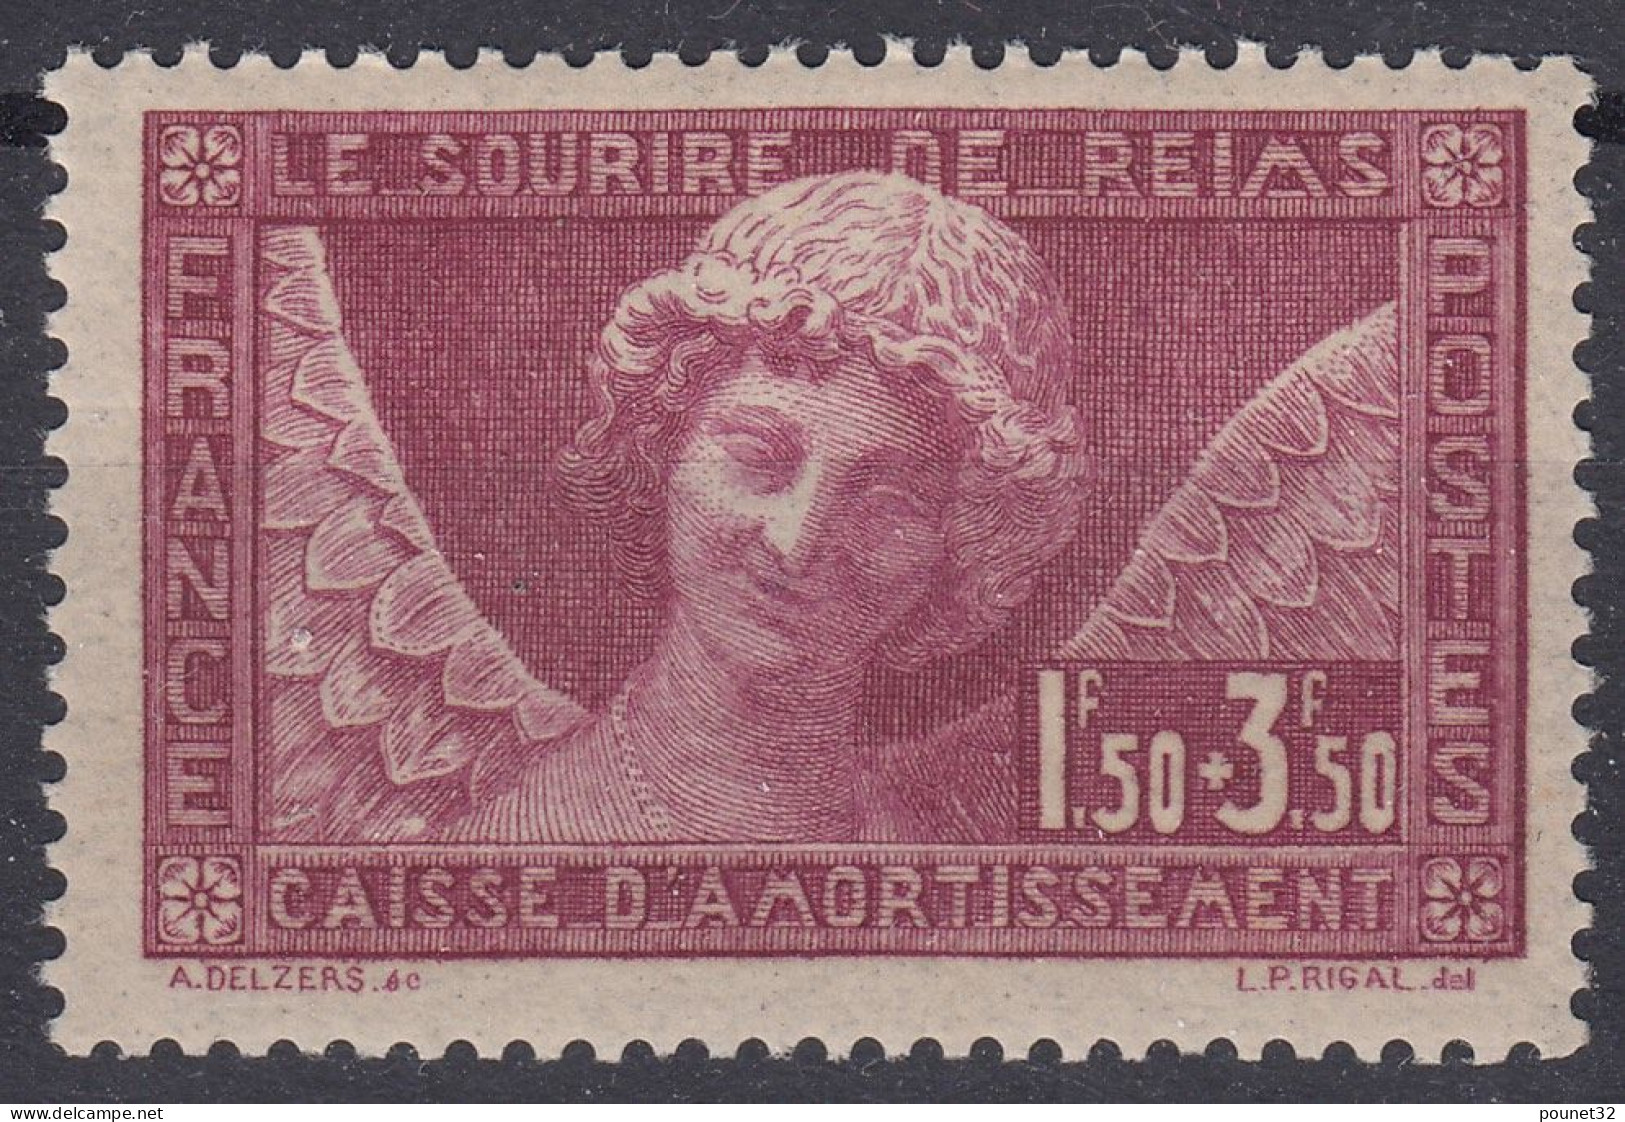 FRANCE SOURIRE REIMS N° 256 NEUF GOMME LEGEREMENT ADHEREE MAIS SANS CHARNIERE - Unused Stamps